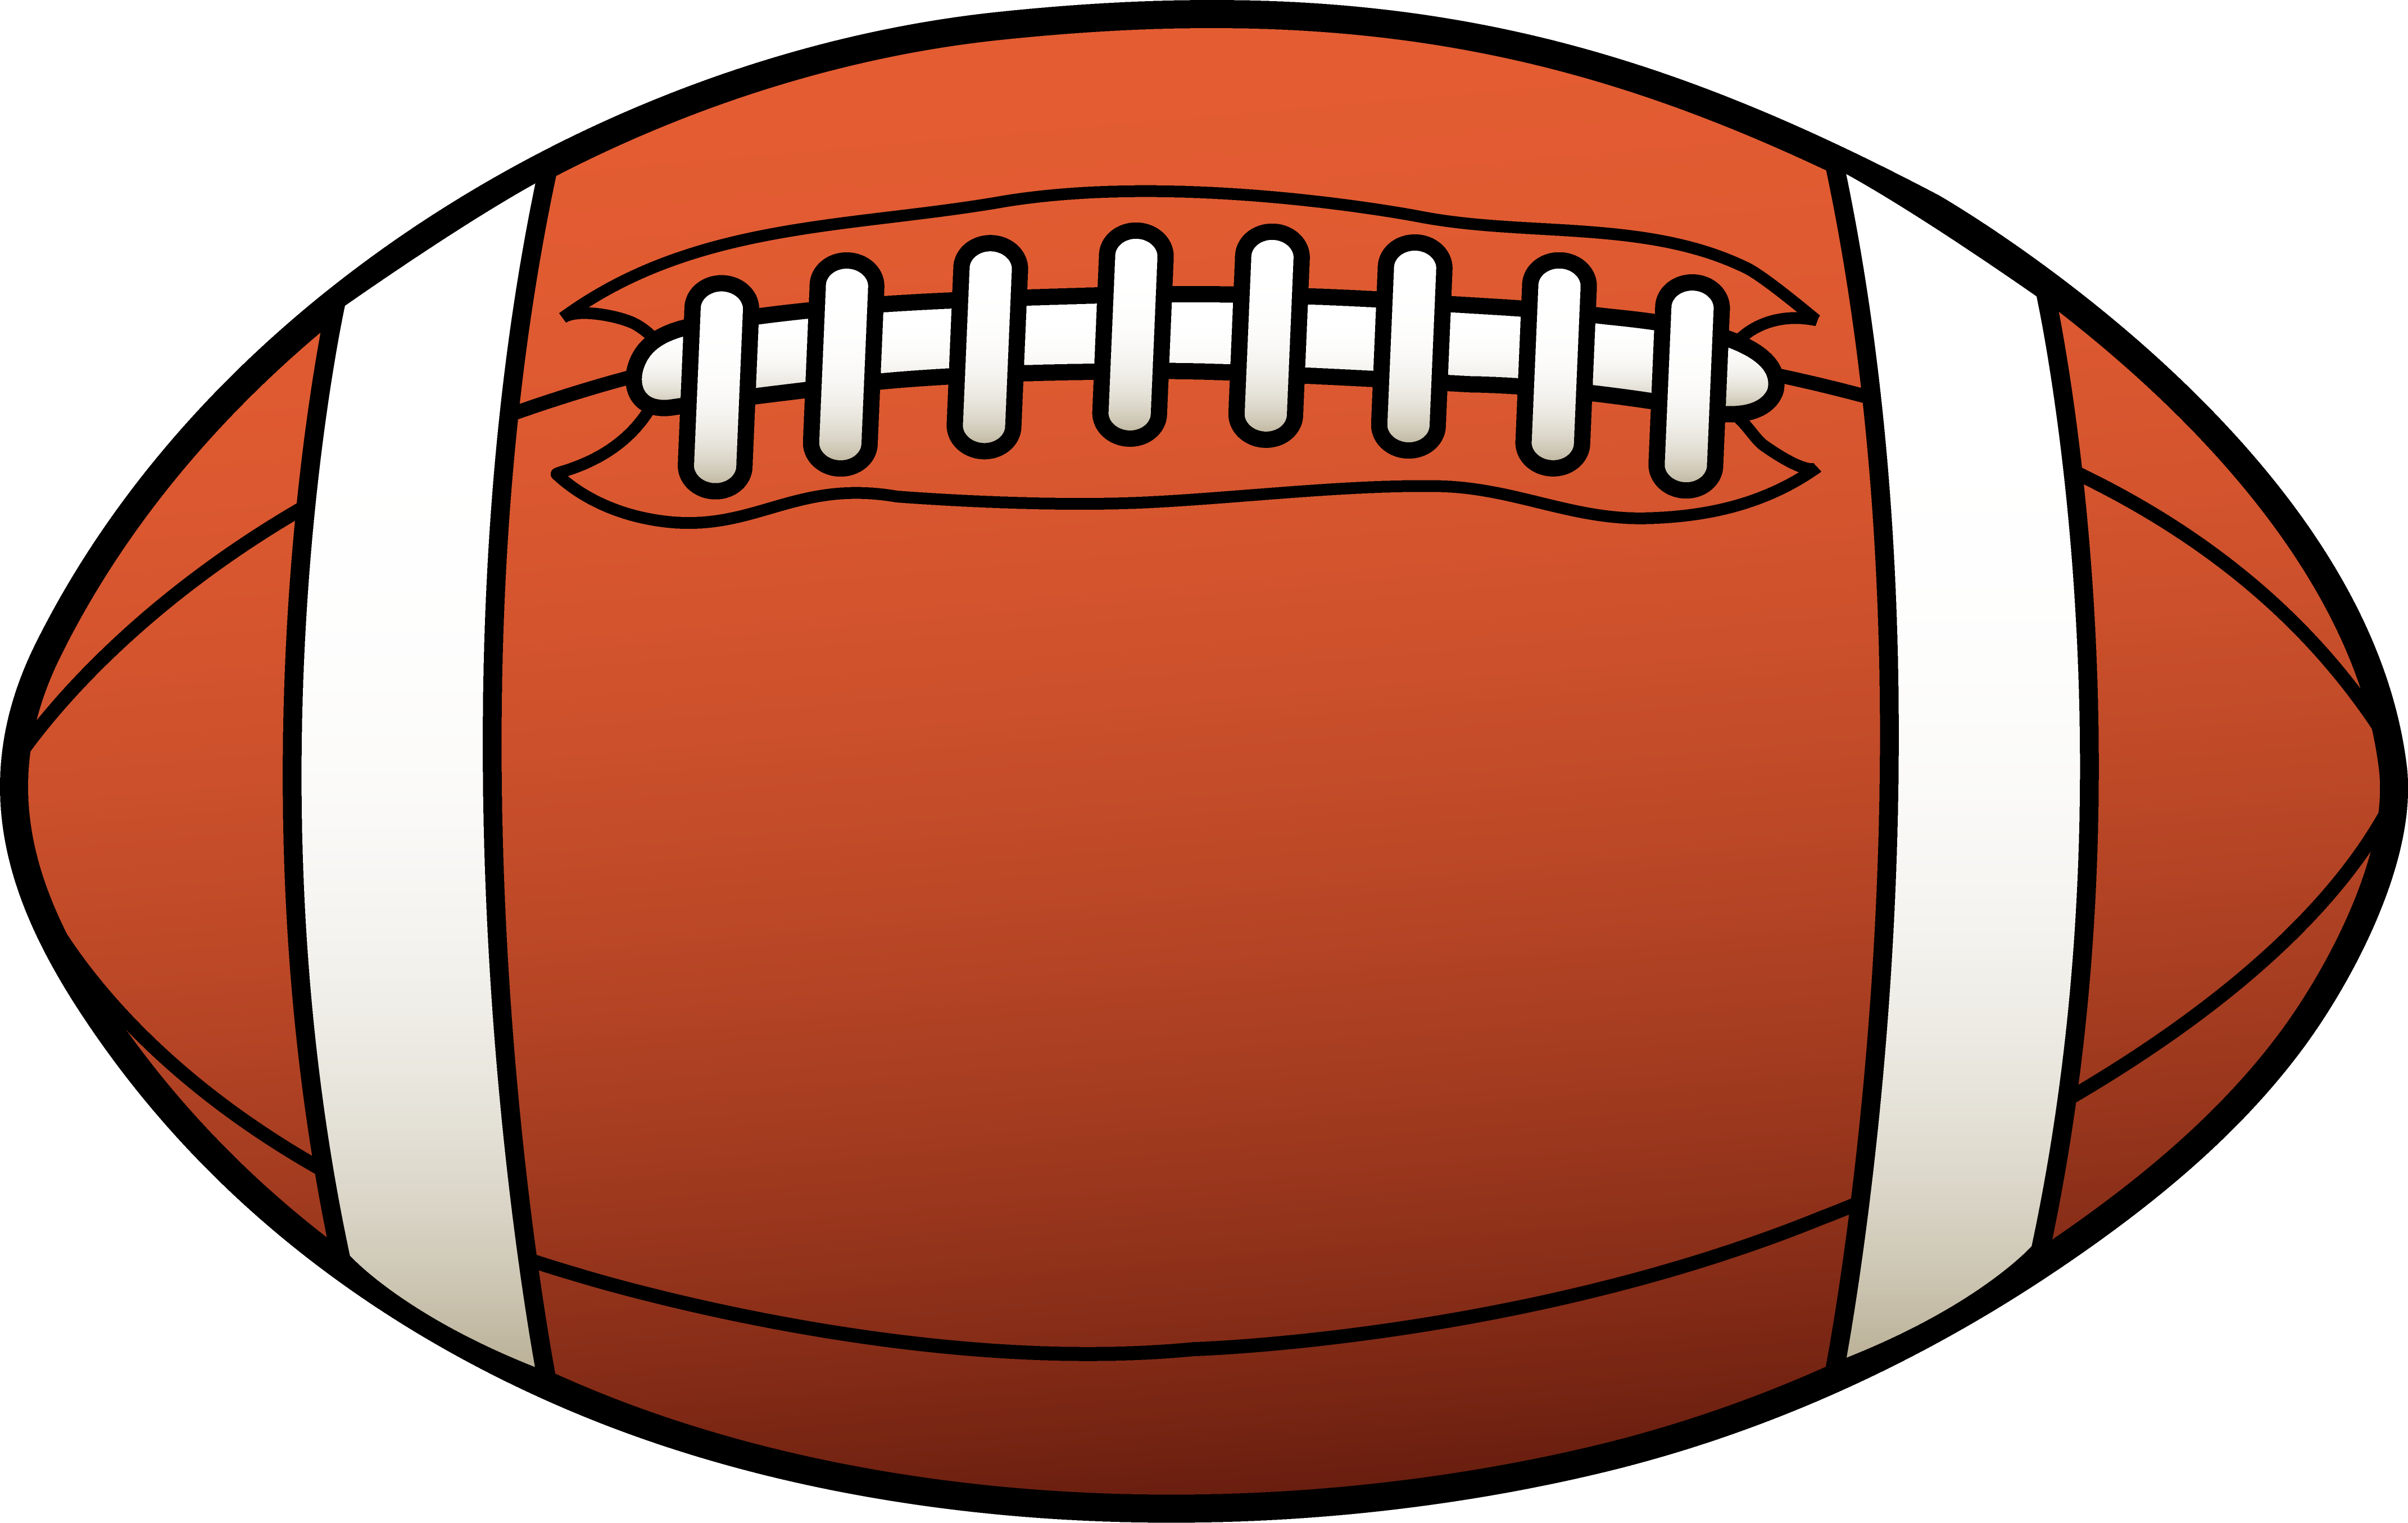 Picture Of A Cartoon Football - ClipArt Best